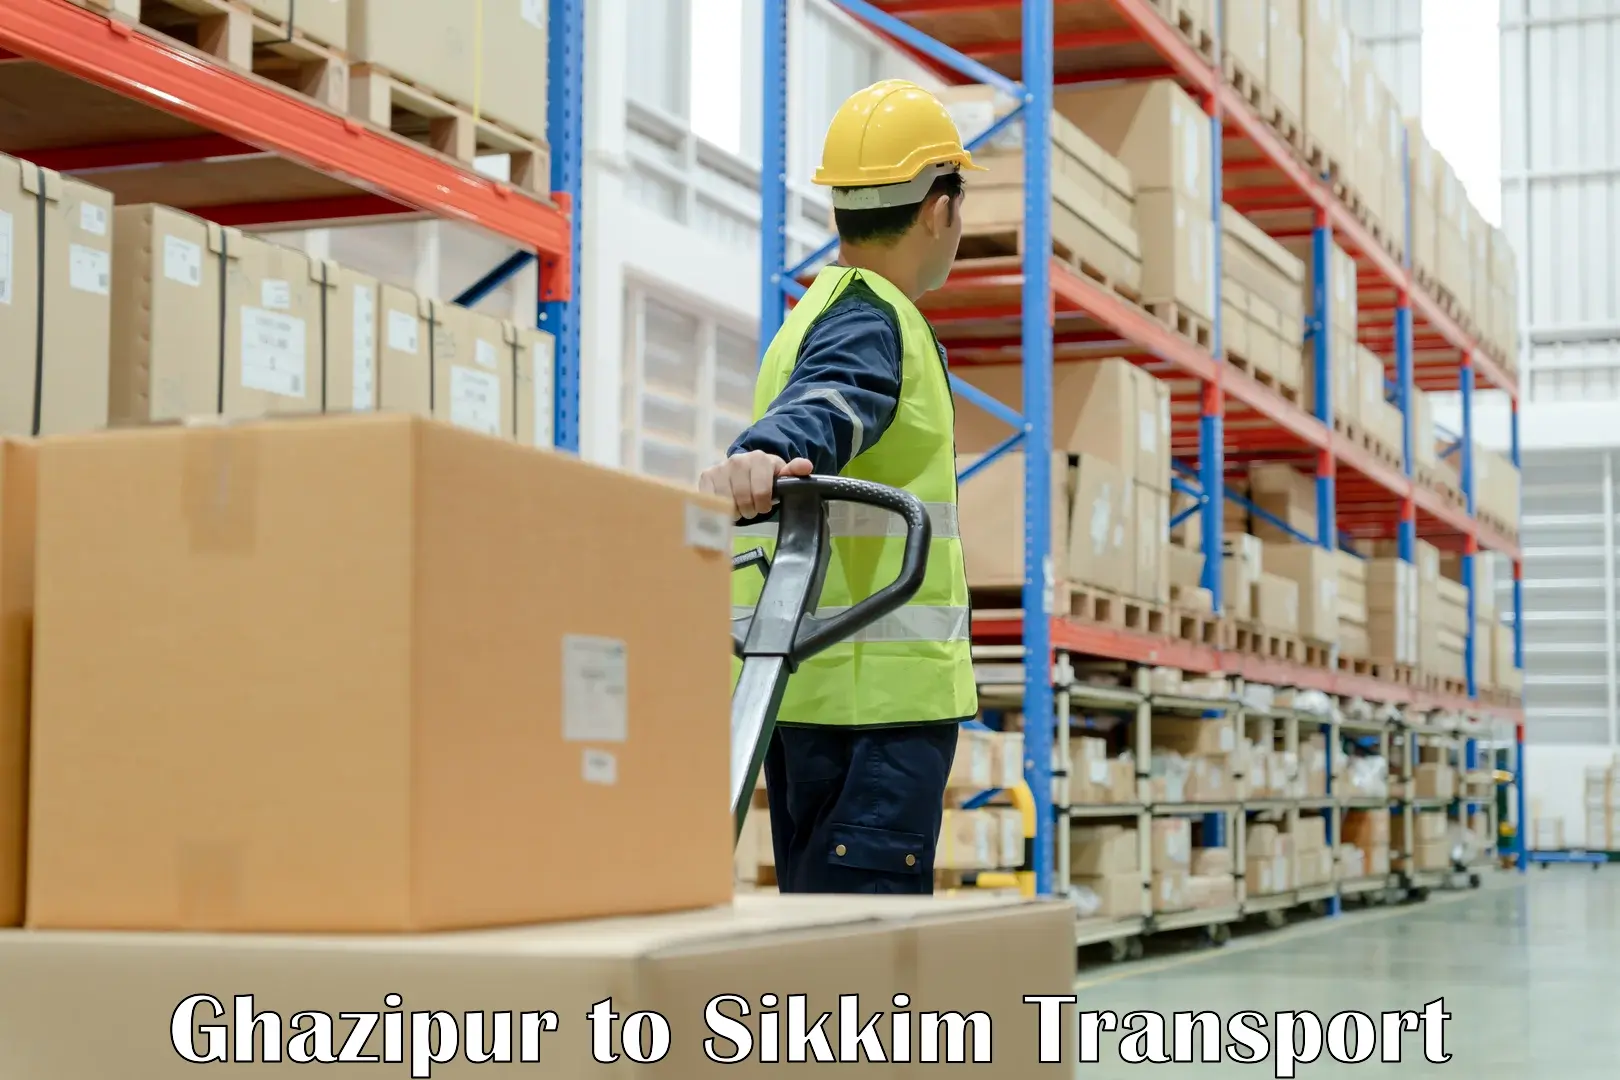 Online transport service Ghazipur to East Sikkim